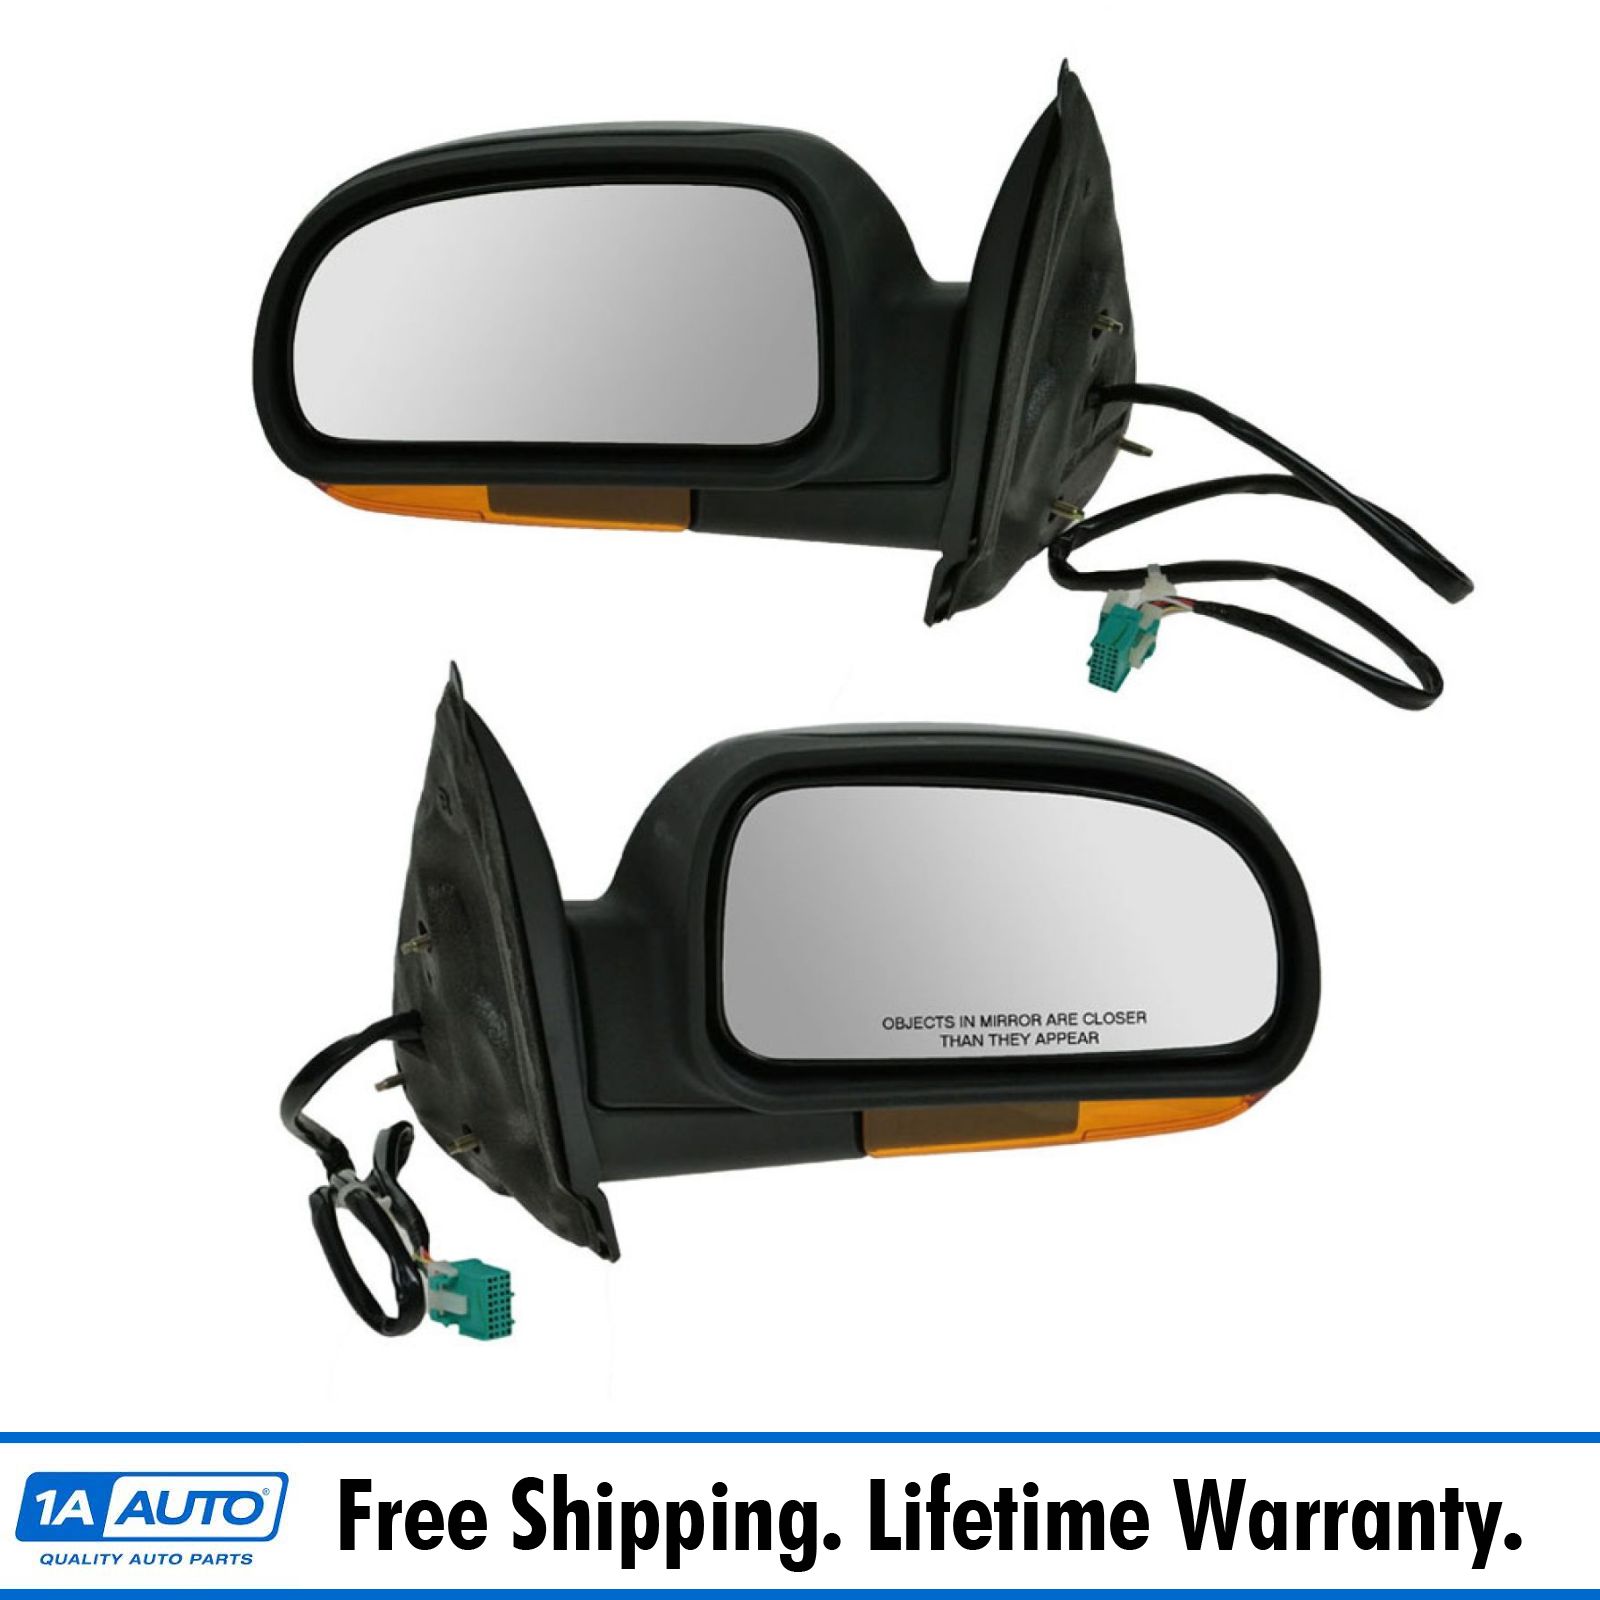 2002-06 GMC Envoy XL Mirror POWER FOLDING HEATED with AMBER TURN SIGNAL & TEXTURED FINISH PAIR